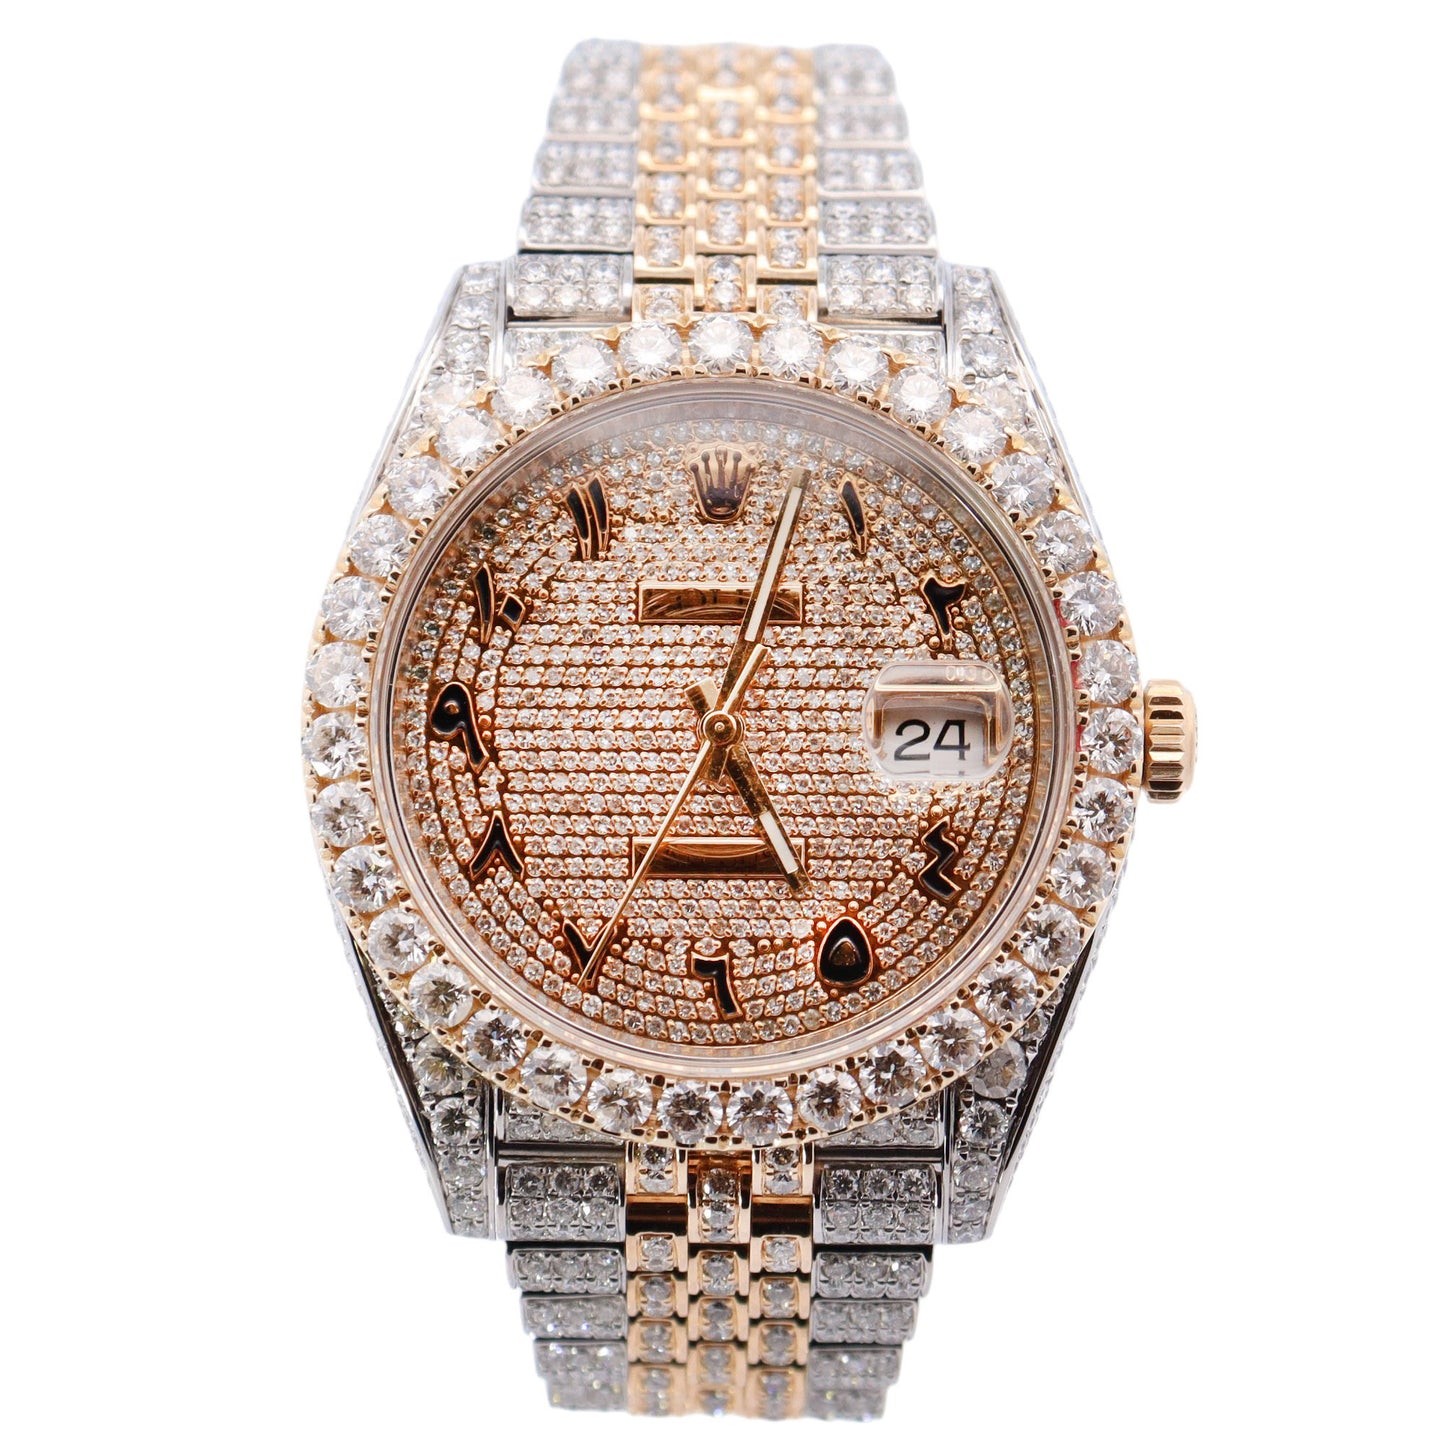 Rolex Men's Iced Out Datejust 41 Yellow Gold & Steel 41mm White Stick Dial Watch Reference# 126333 - Happy Jewelers Fine Jewelry Lifetime Warranty